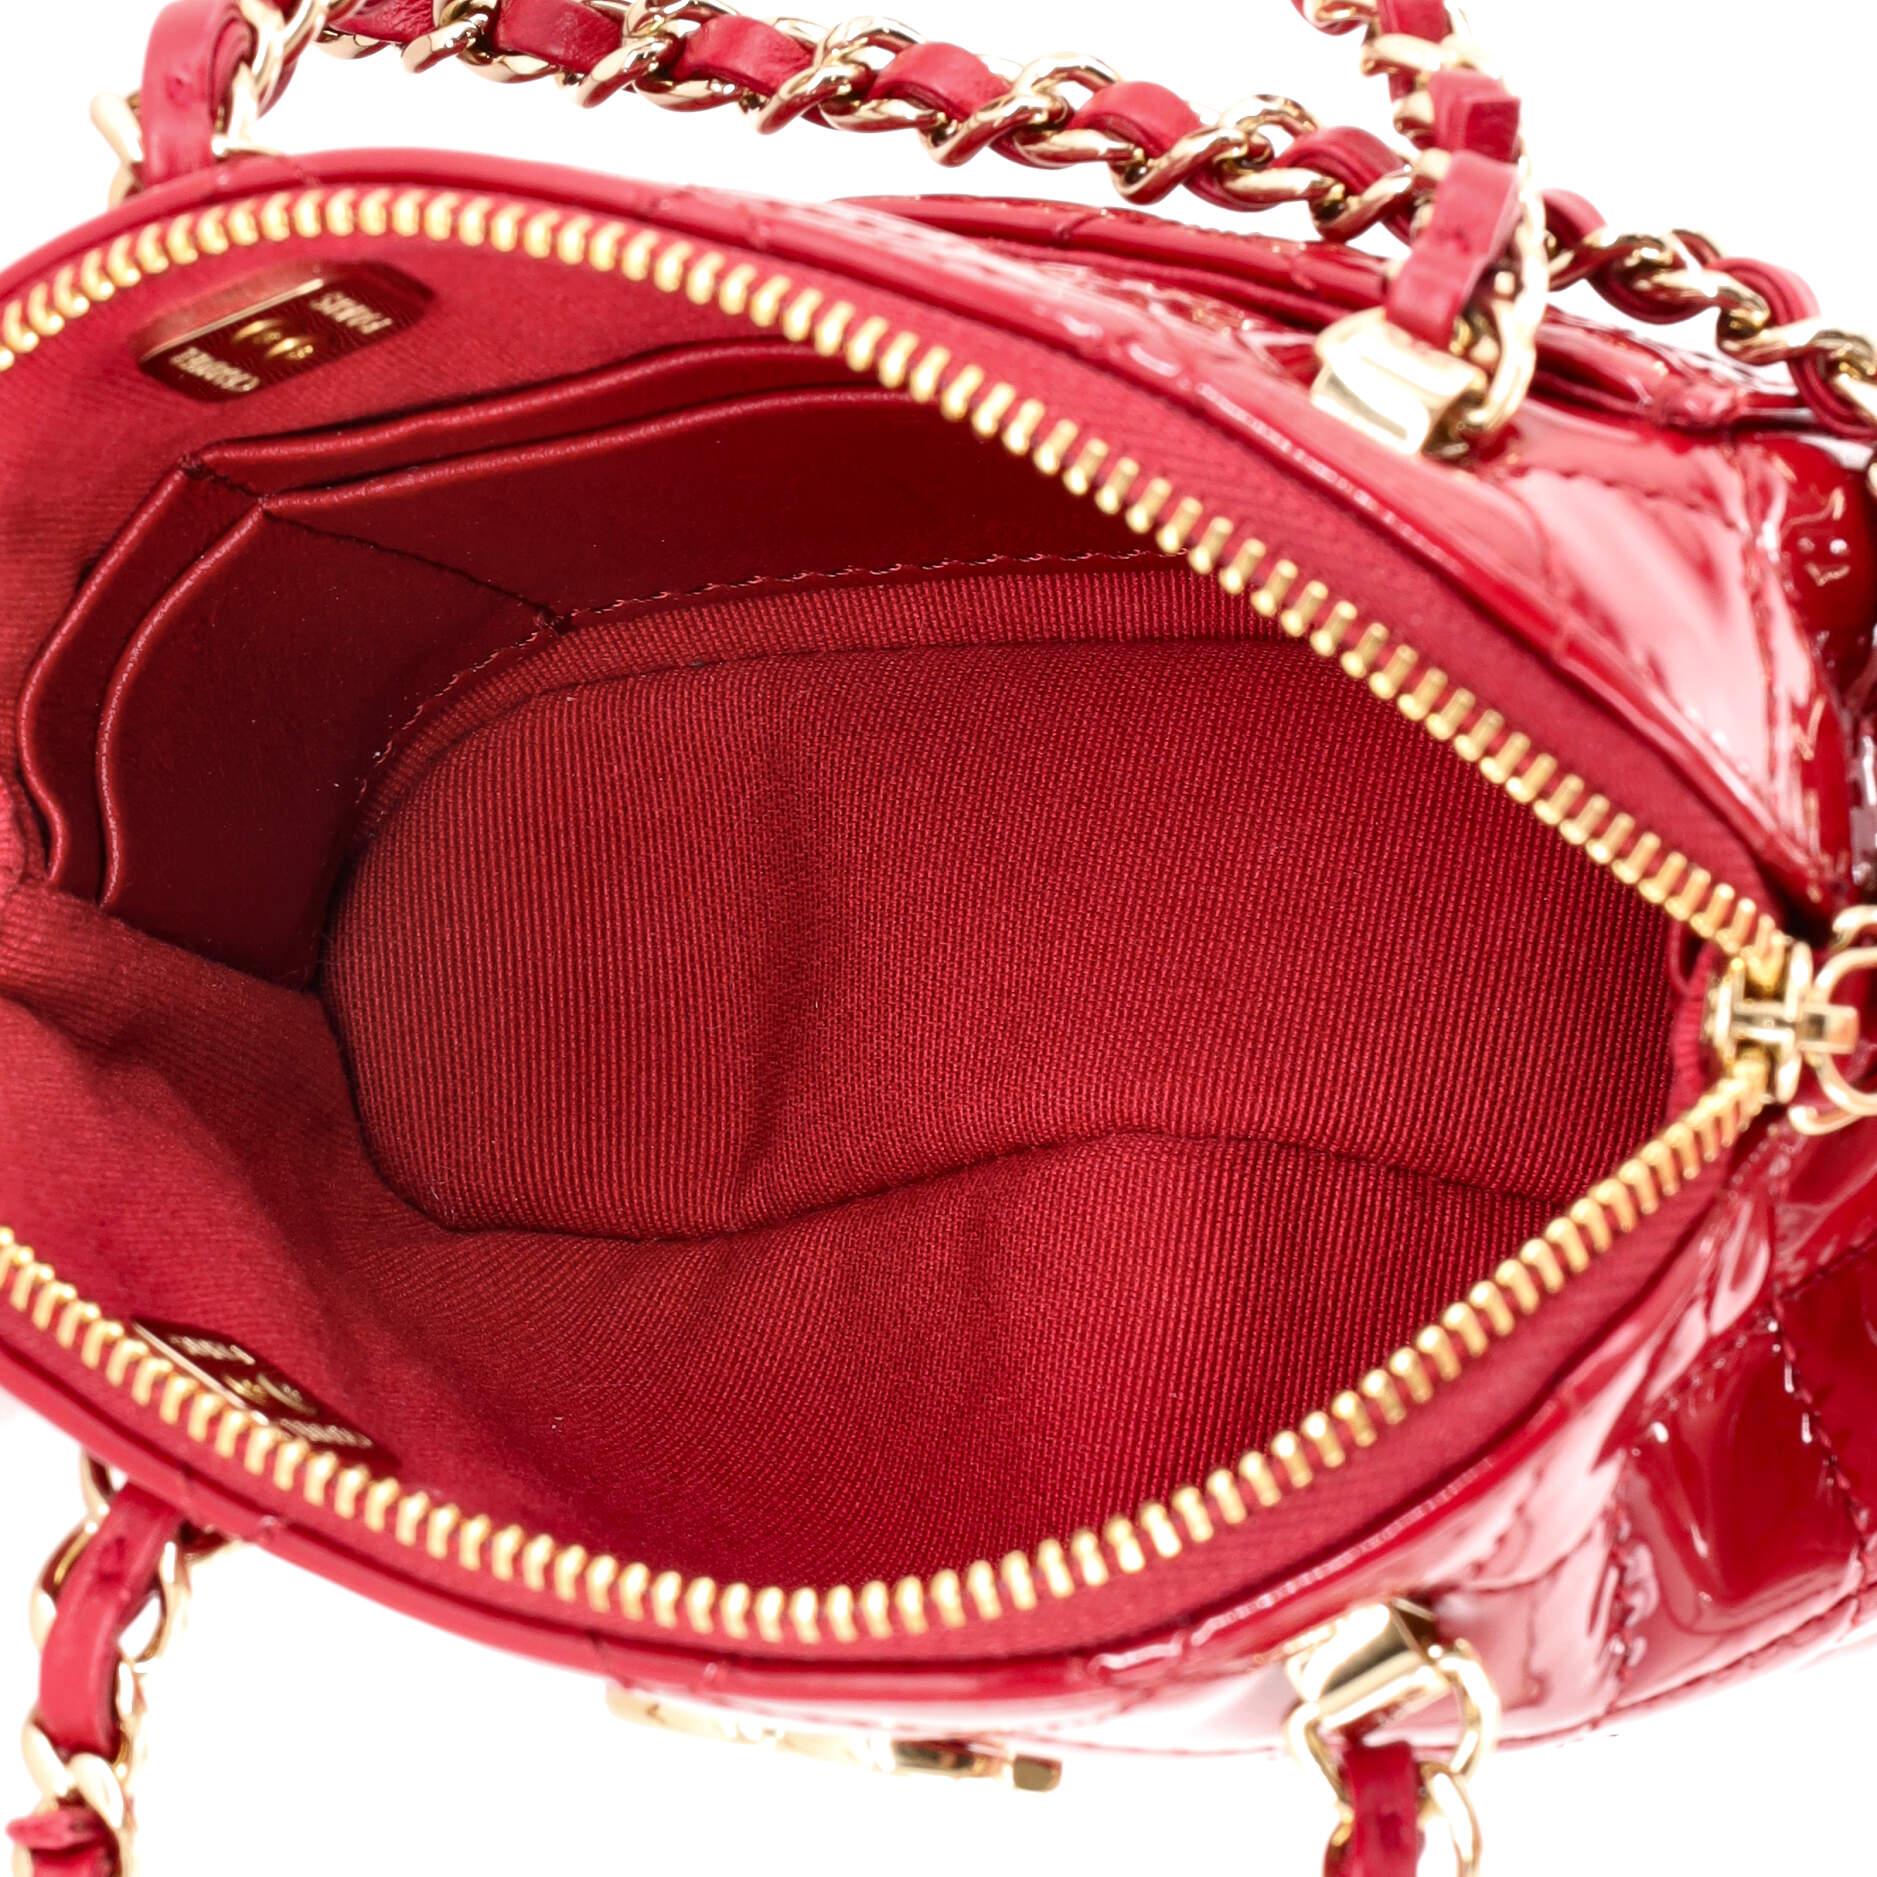  Chanel CC Dome Zip Crossbody Bag Quilted Patent Mini 2